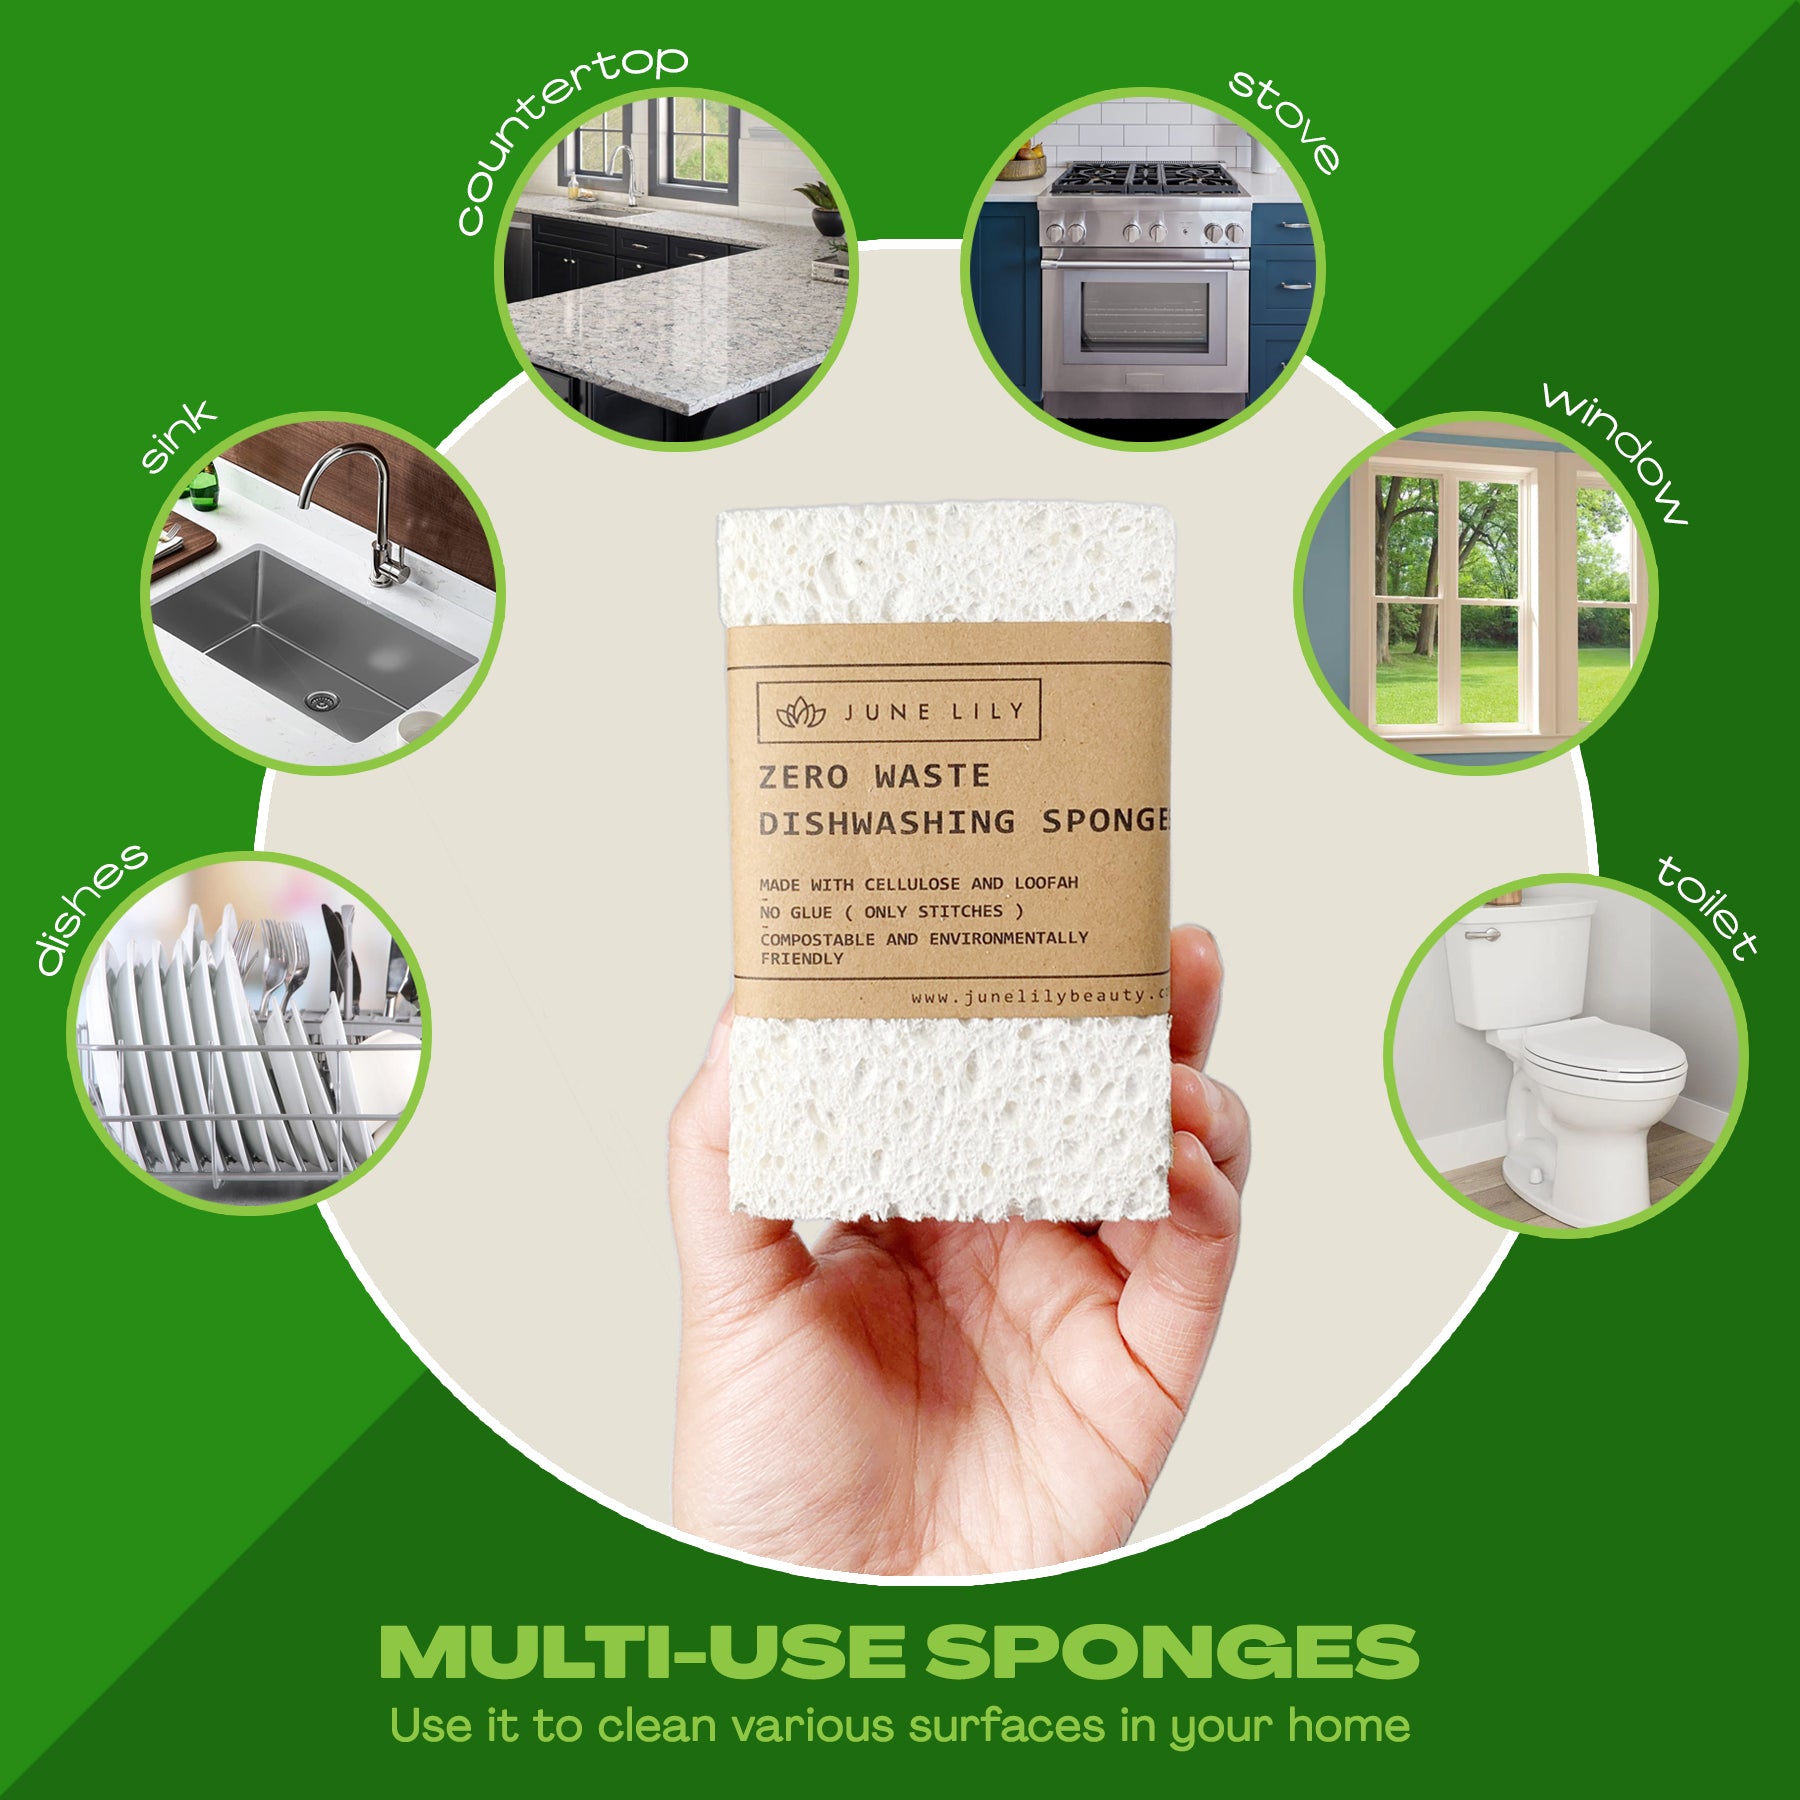 Baofu Kitchen Cleaning Sponges Eco Non-Scratch for Dish Scrub Sponges